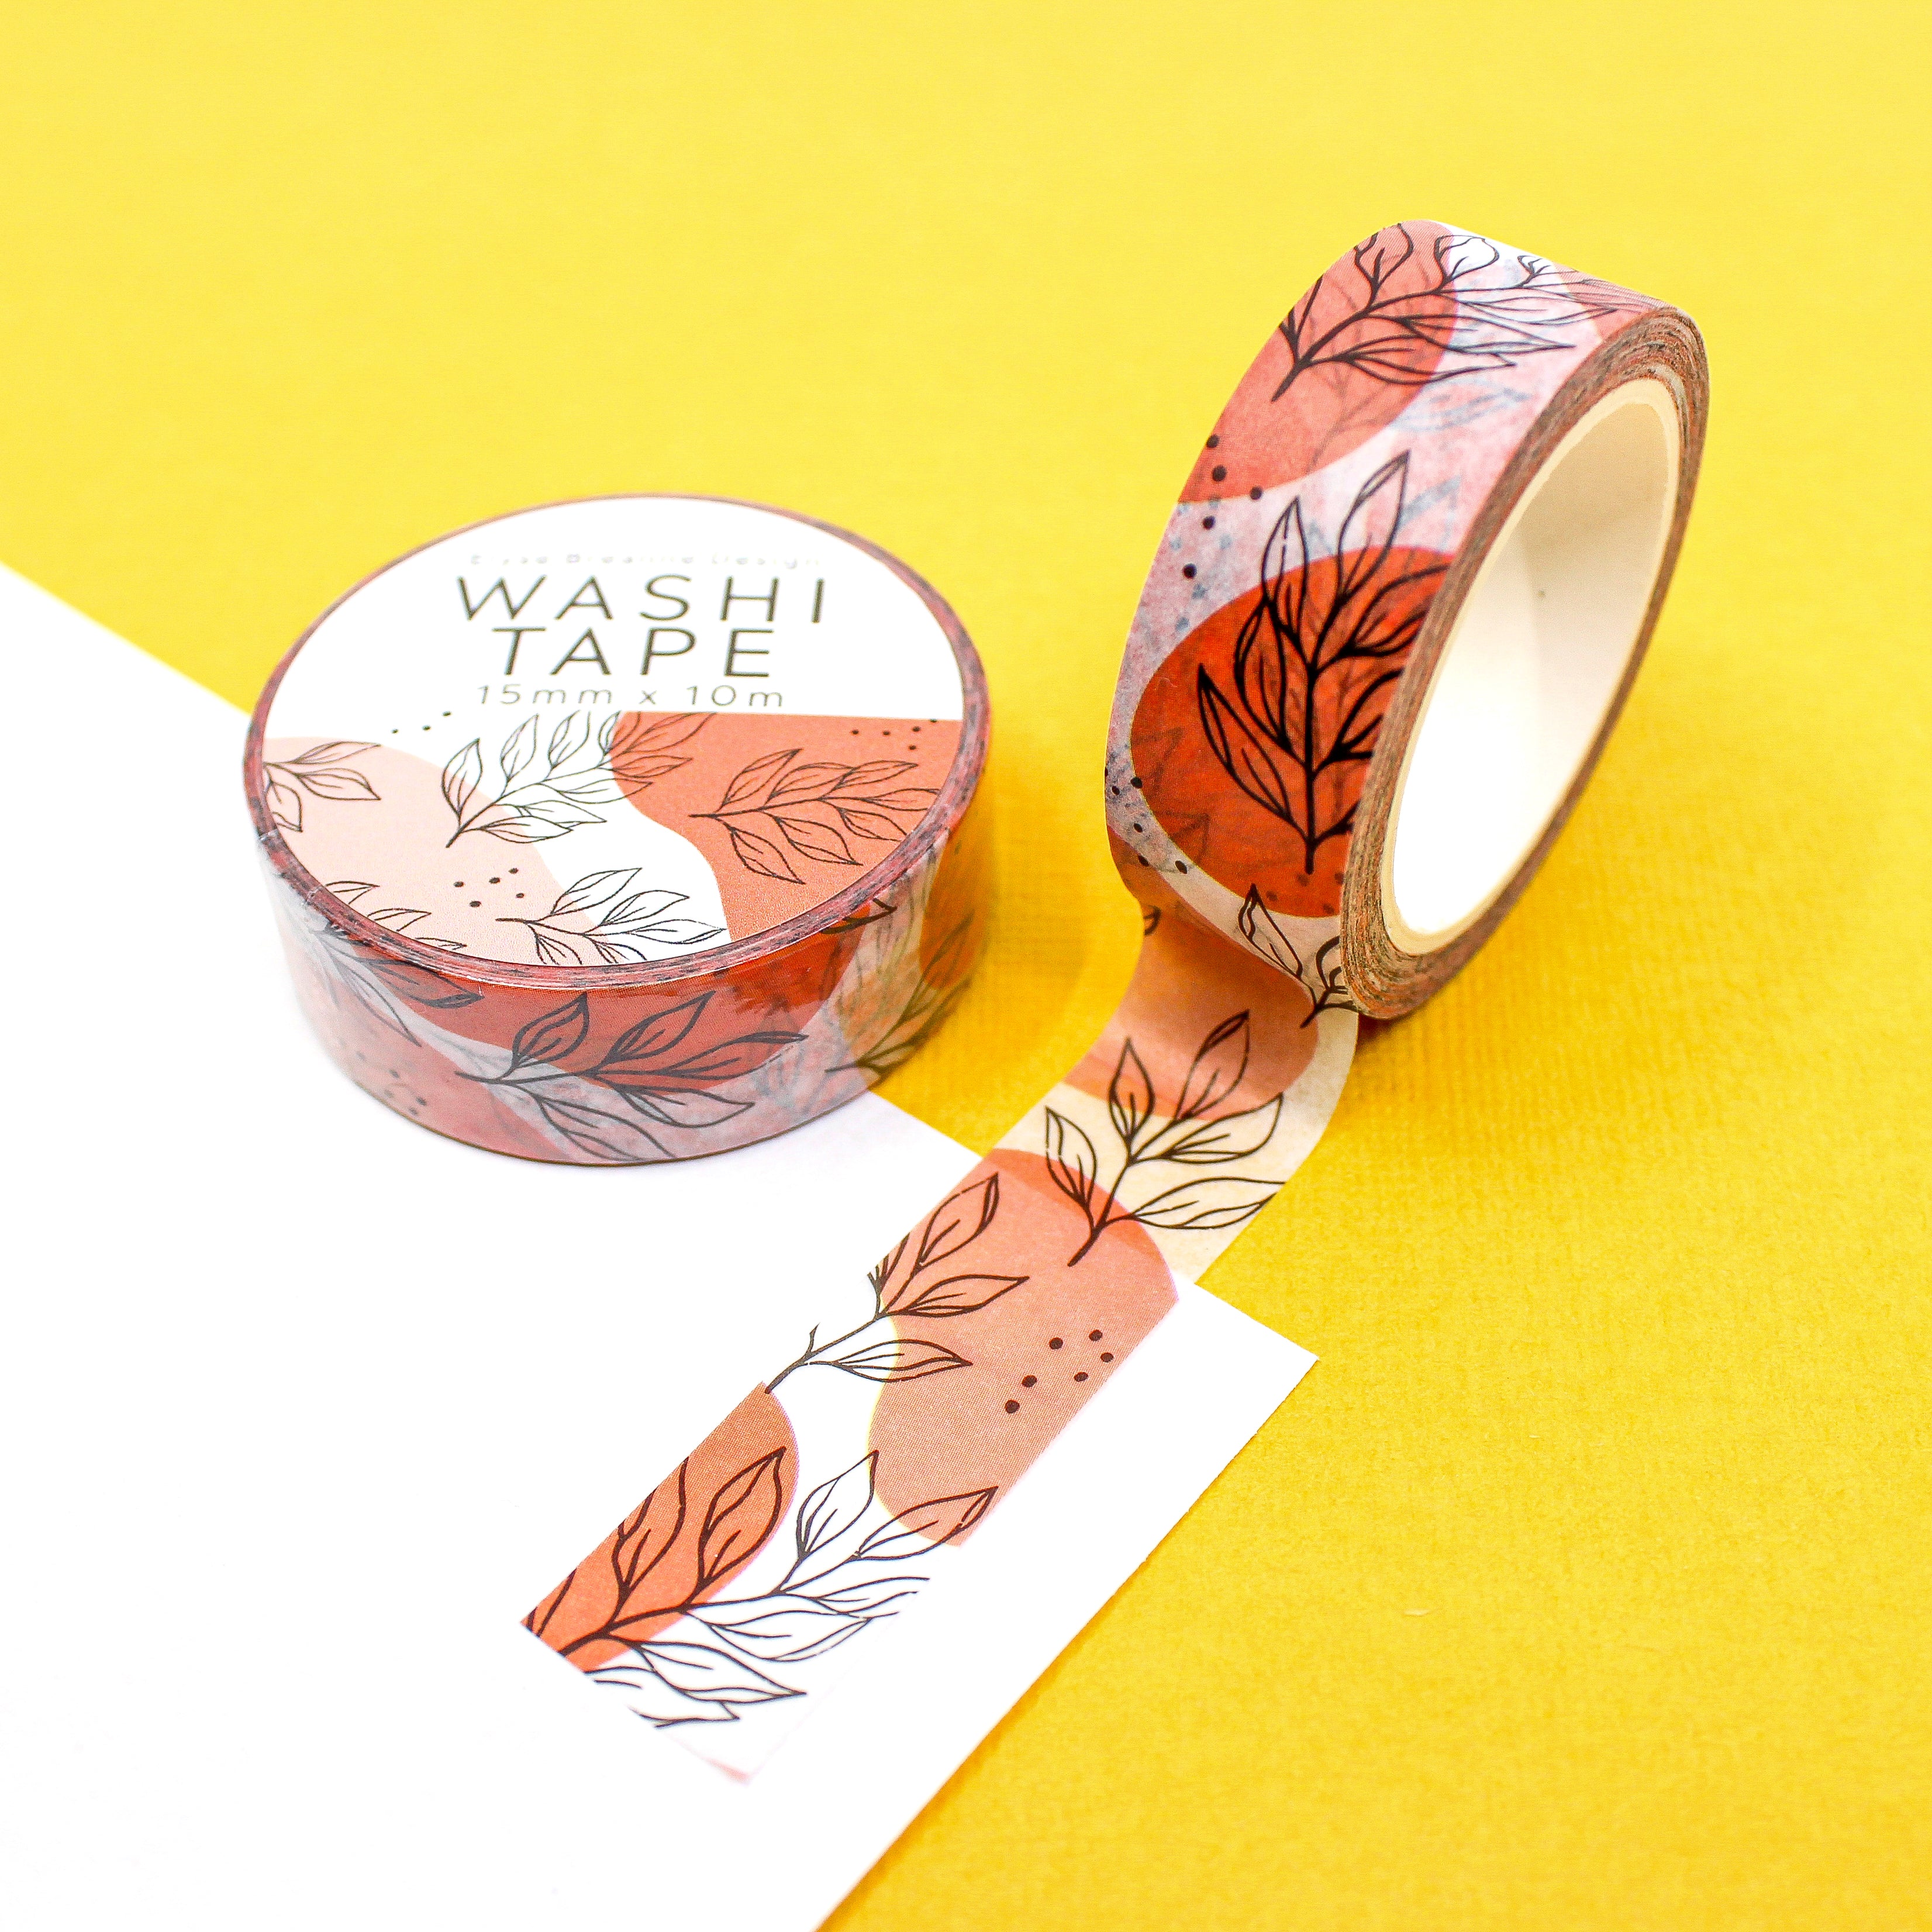 This is a modern pink leaves themed washi tape from BBB Supplies Craft Shop